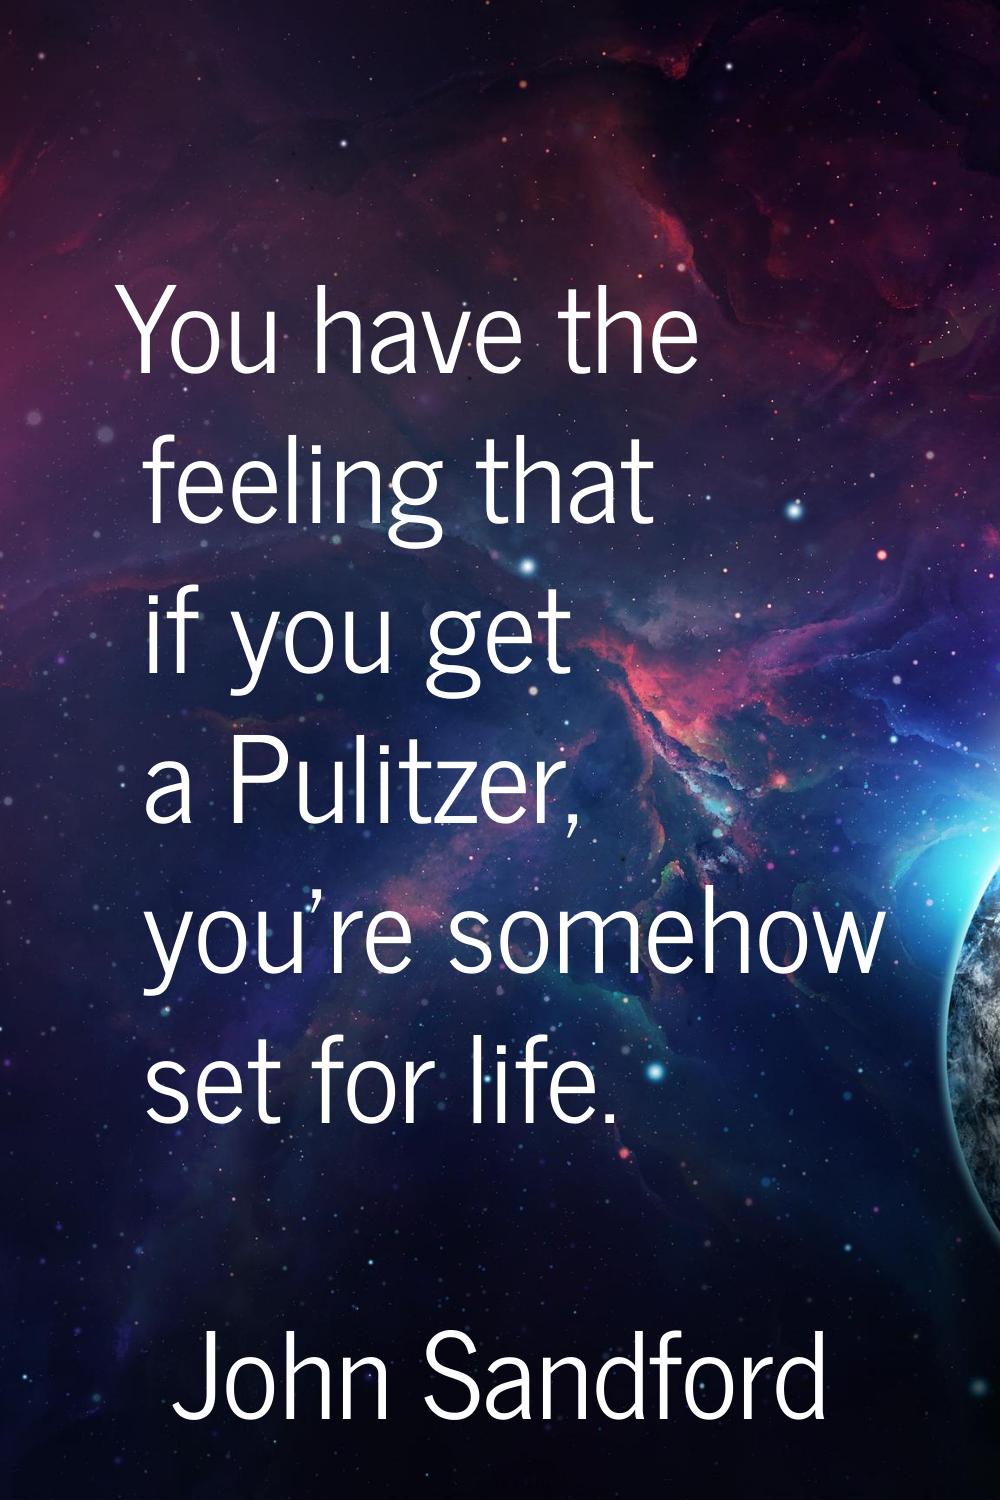 You have the feeling that if you get a Pulitzer, you're somehow set for life.